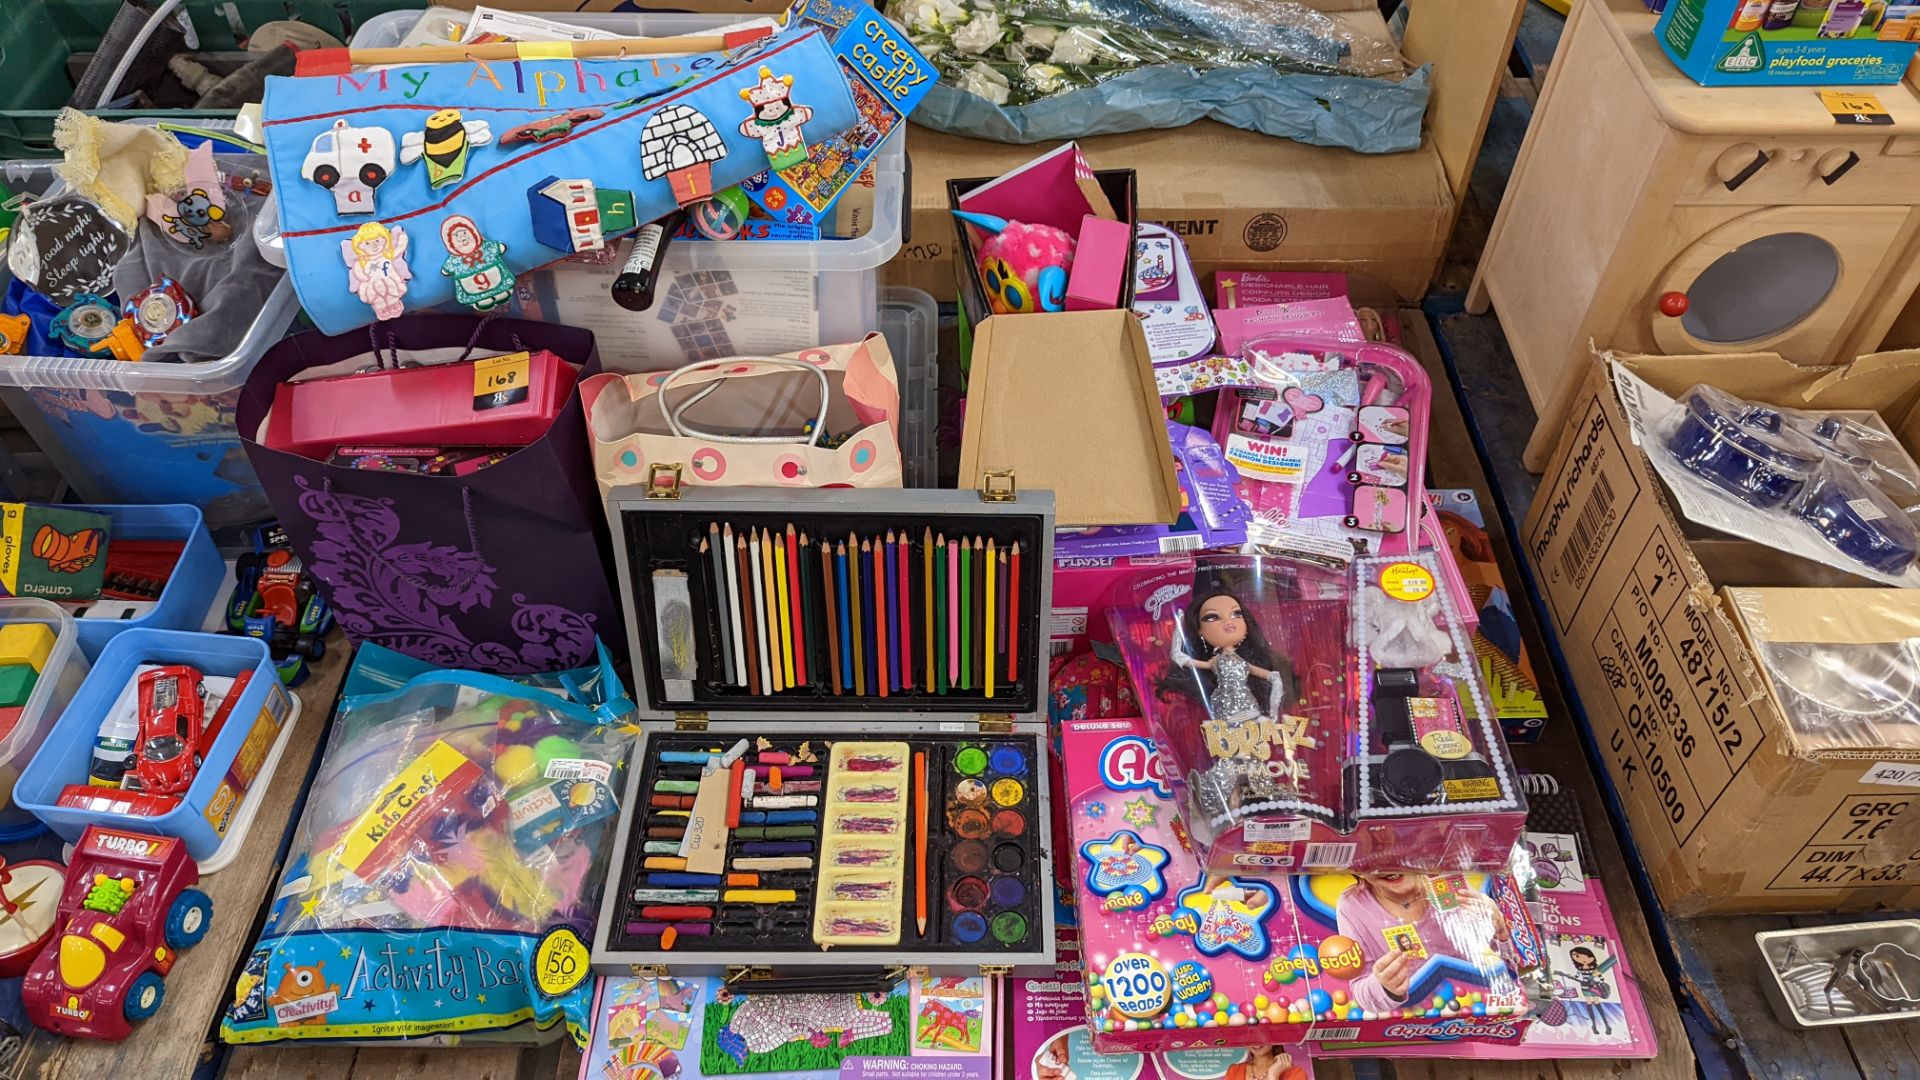 The contents of a pallet of arts/crafts items, dolls & similar